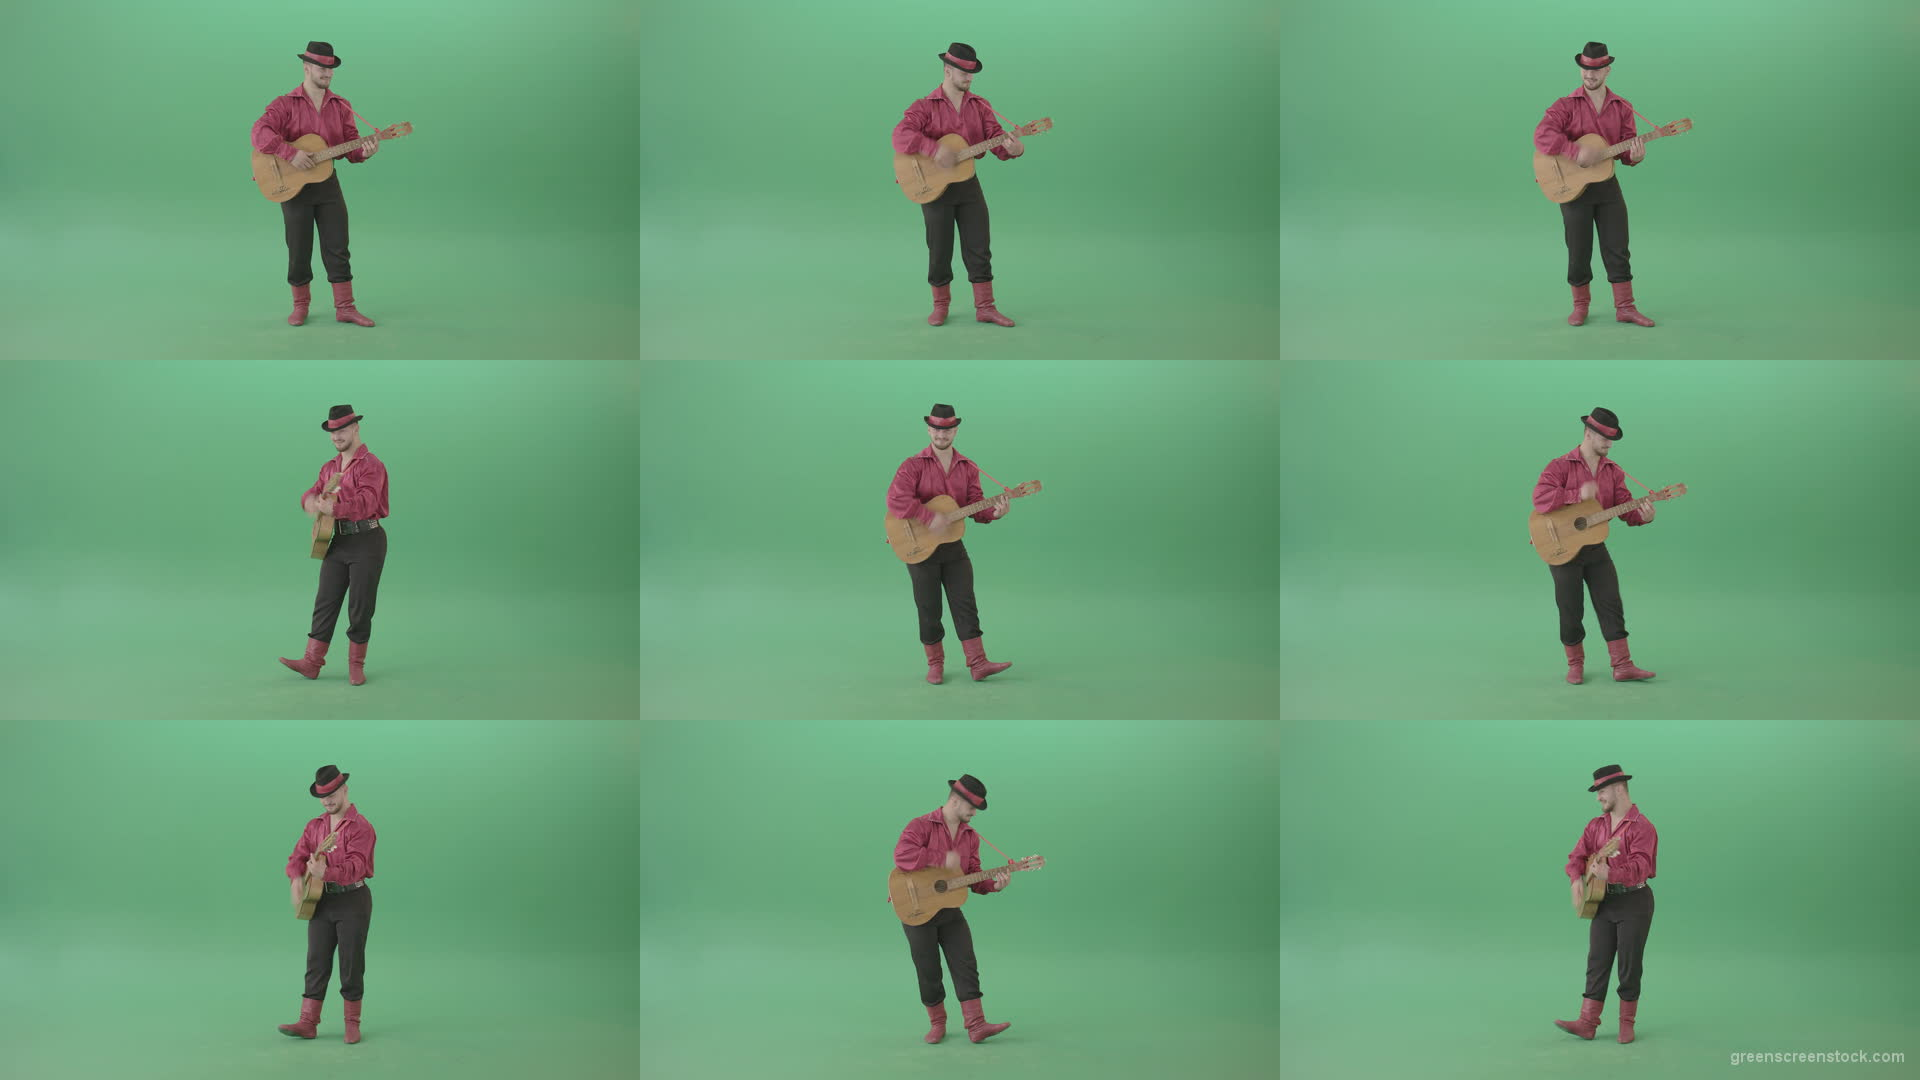 Balkan-Gipsy-man-in-red-shirt-playing-guitar-isolated-on-green-screen-4K-Video-Footage-1920 Green Screen Stock